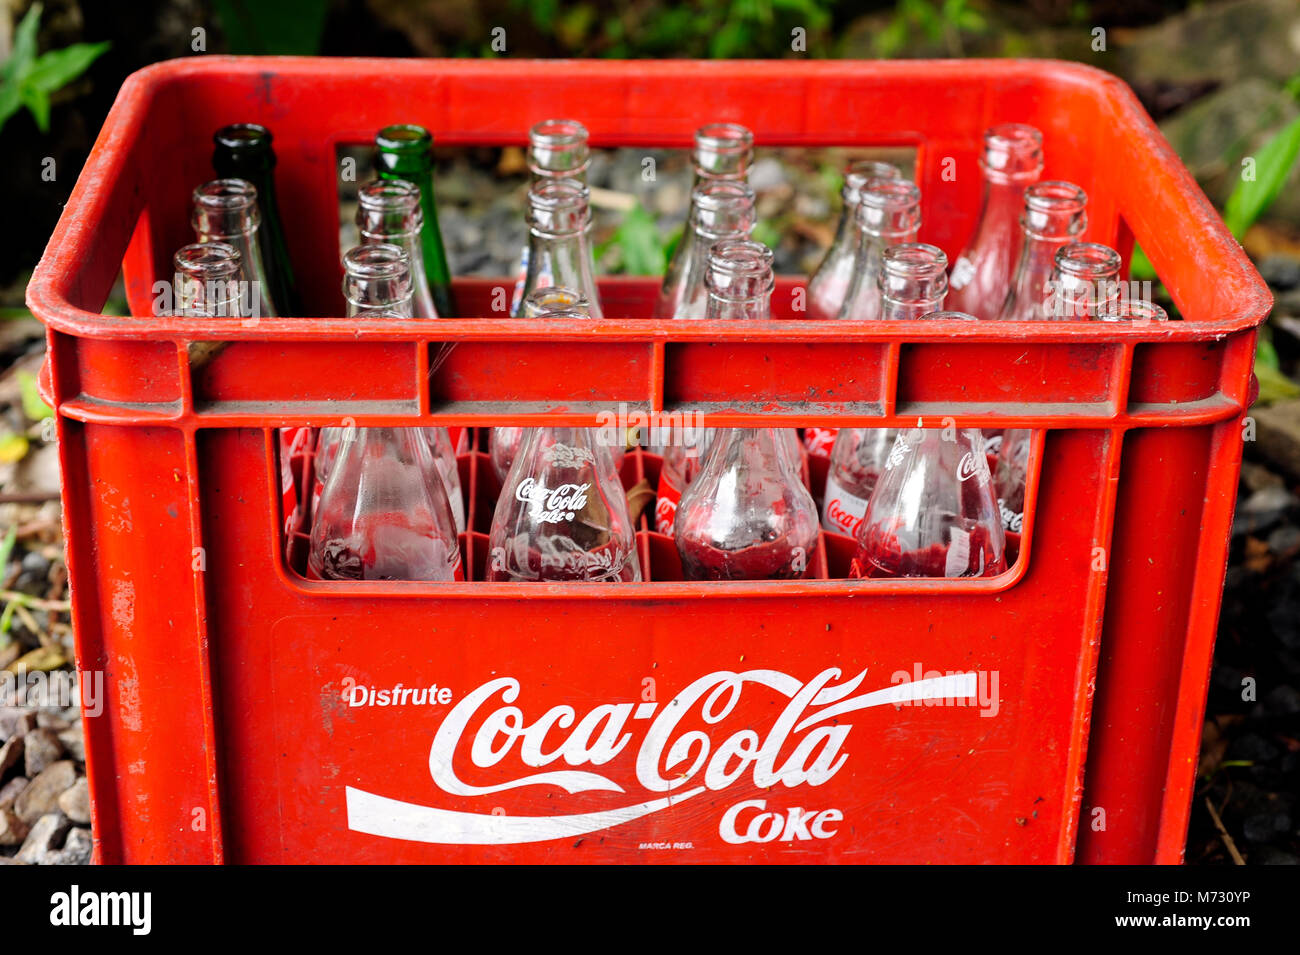 Soft Drink Bottles High Resolution Stock Photography and Images - Alamy